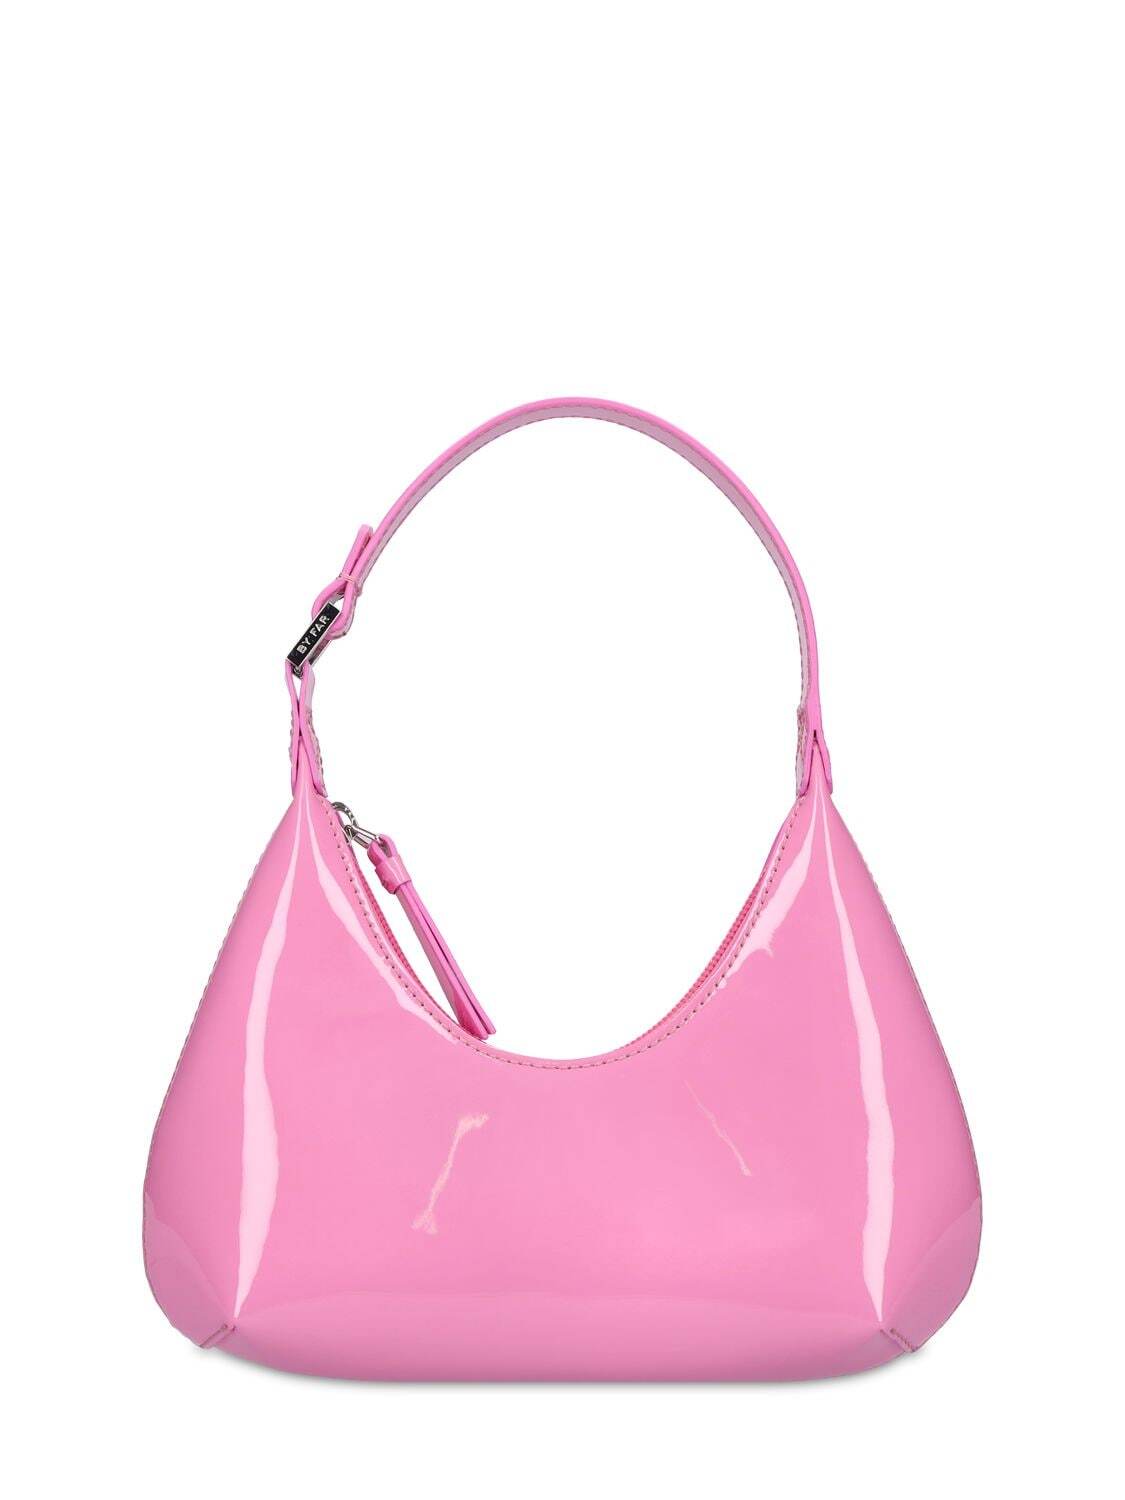 BY FAR Baby Amber Patent Leather Bag in pink